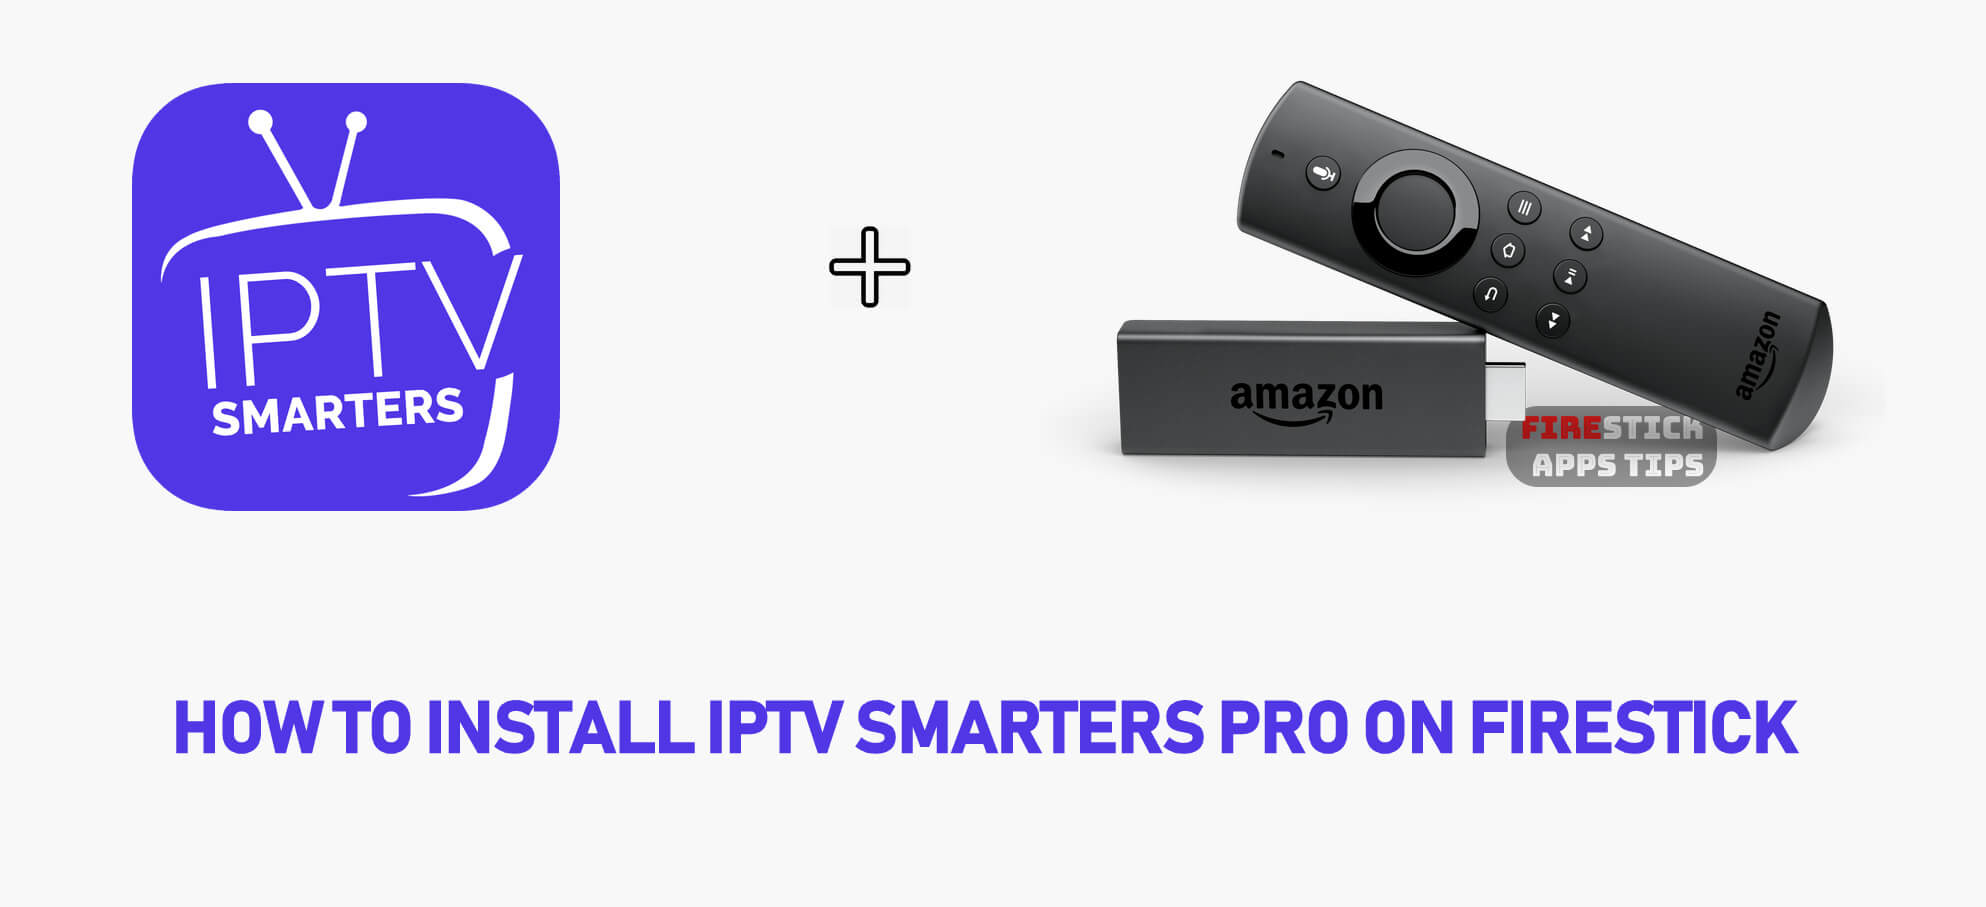 How to Install IPTV Smarters Pro on Firestick [2021]